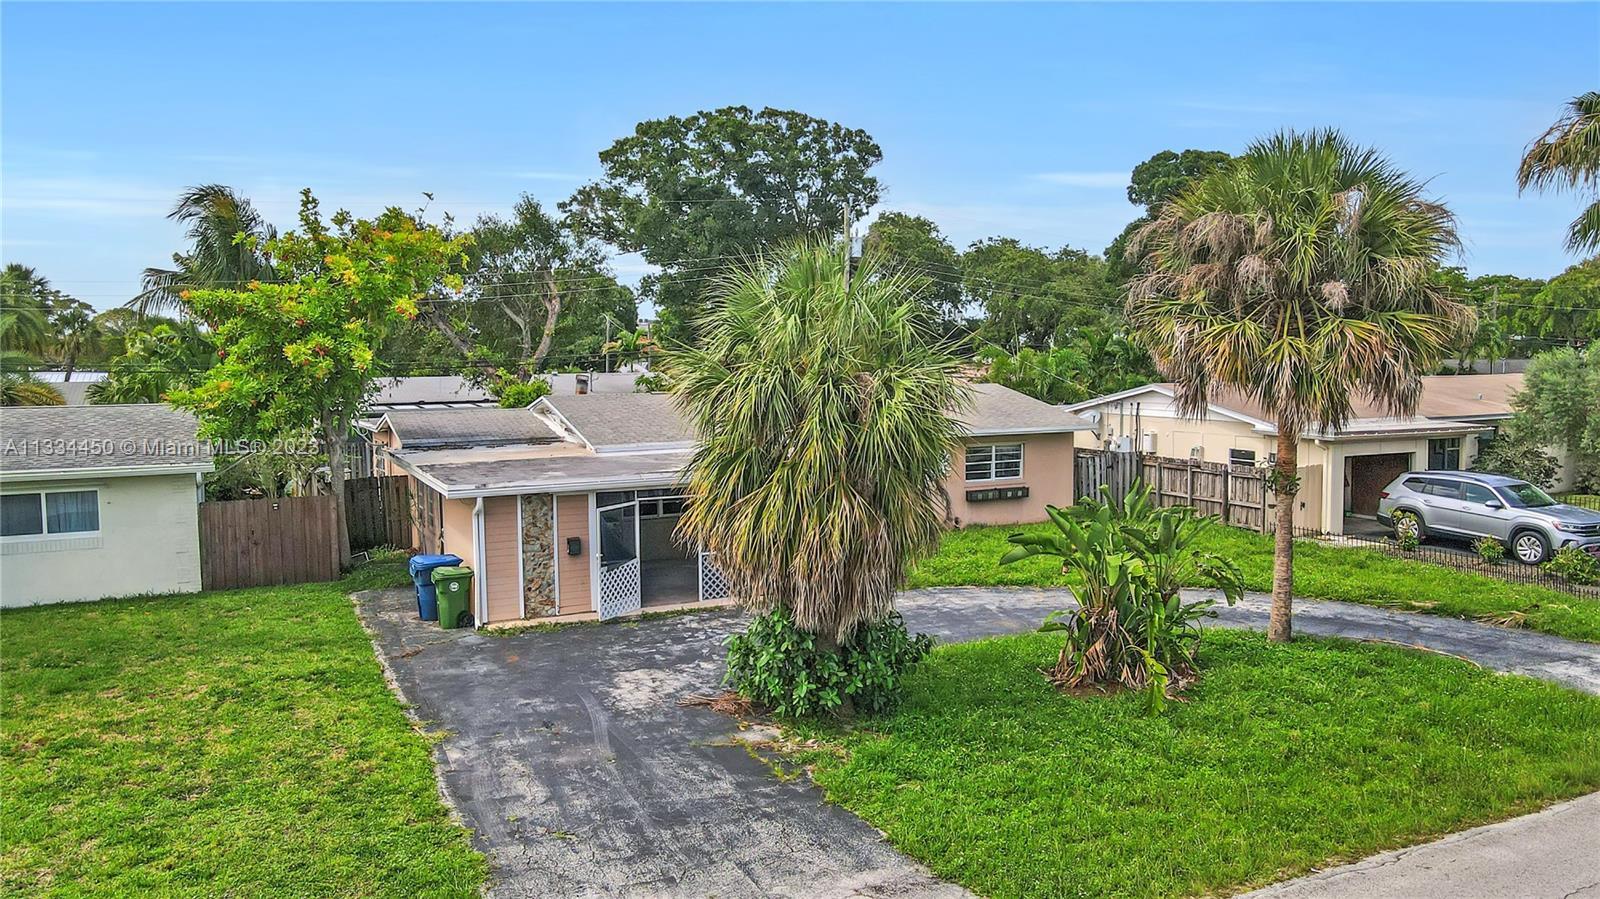 PRICE JUST REDUCED!!! BUILD YOUR DREAM HOME! Located in the highly desirable central Wilton Manors n